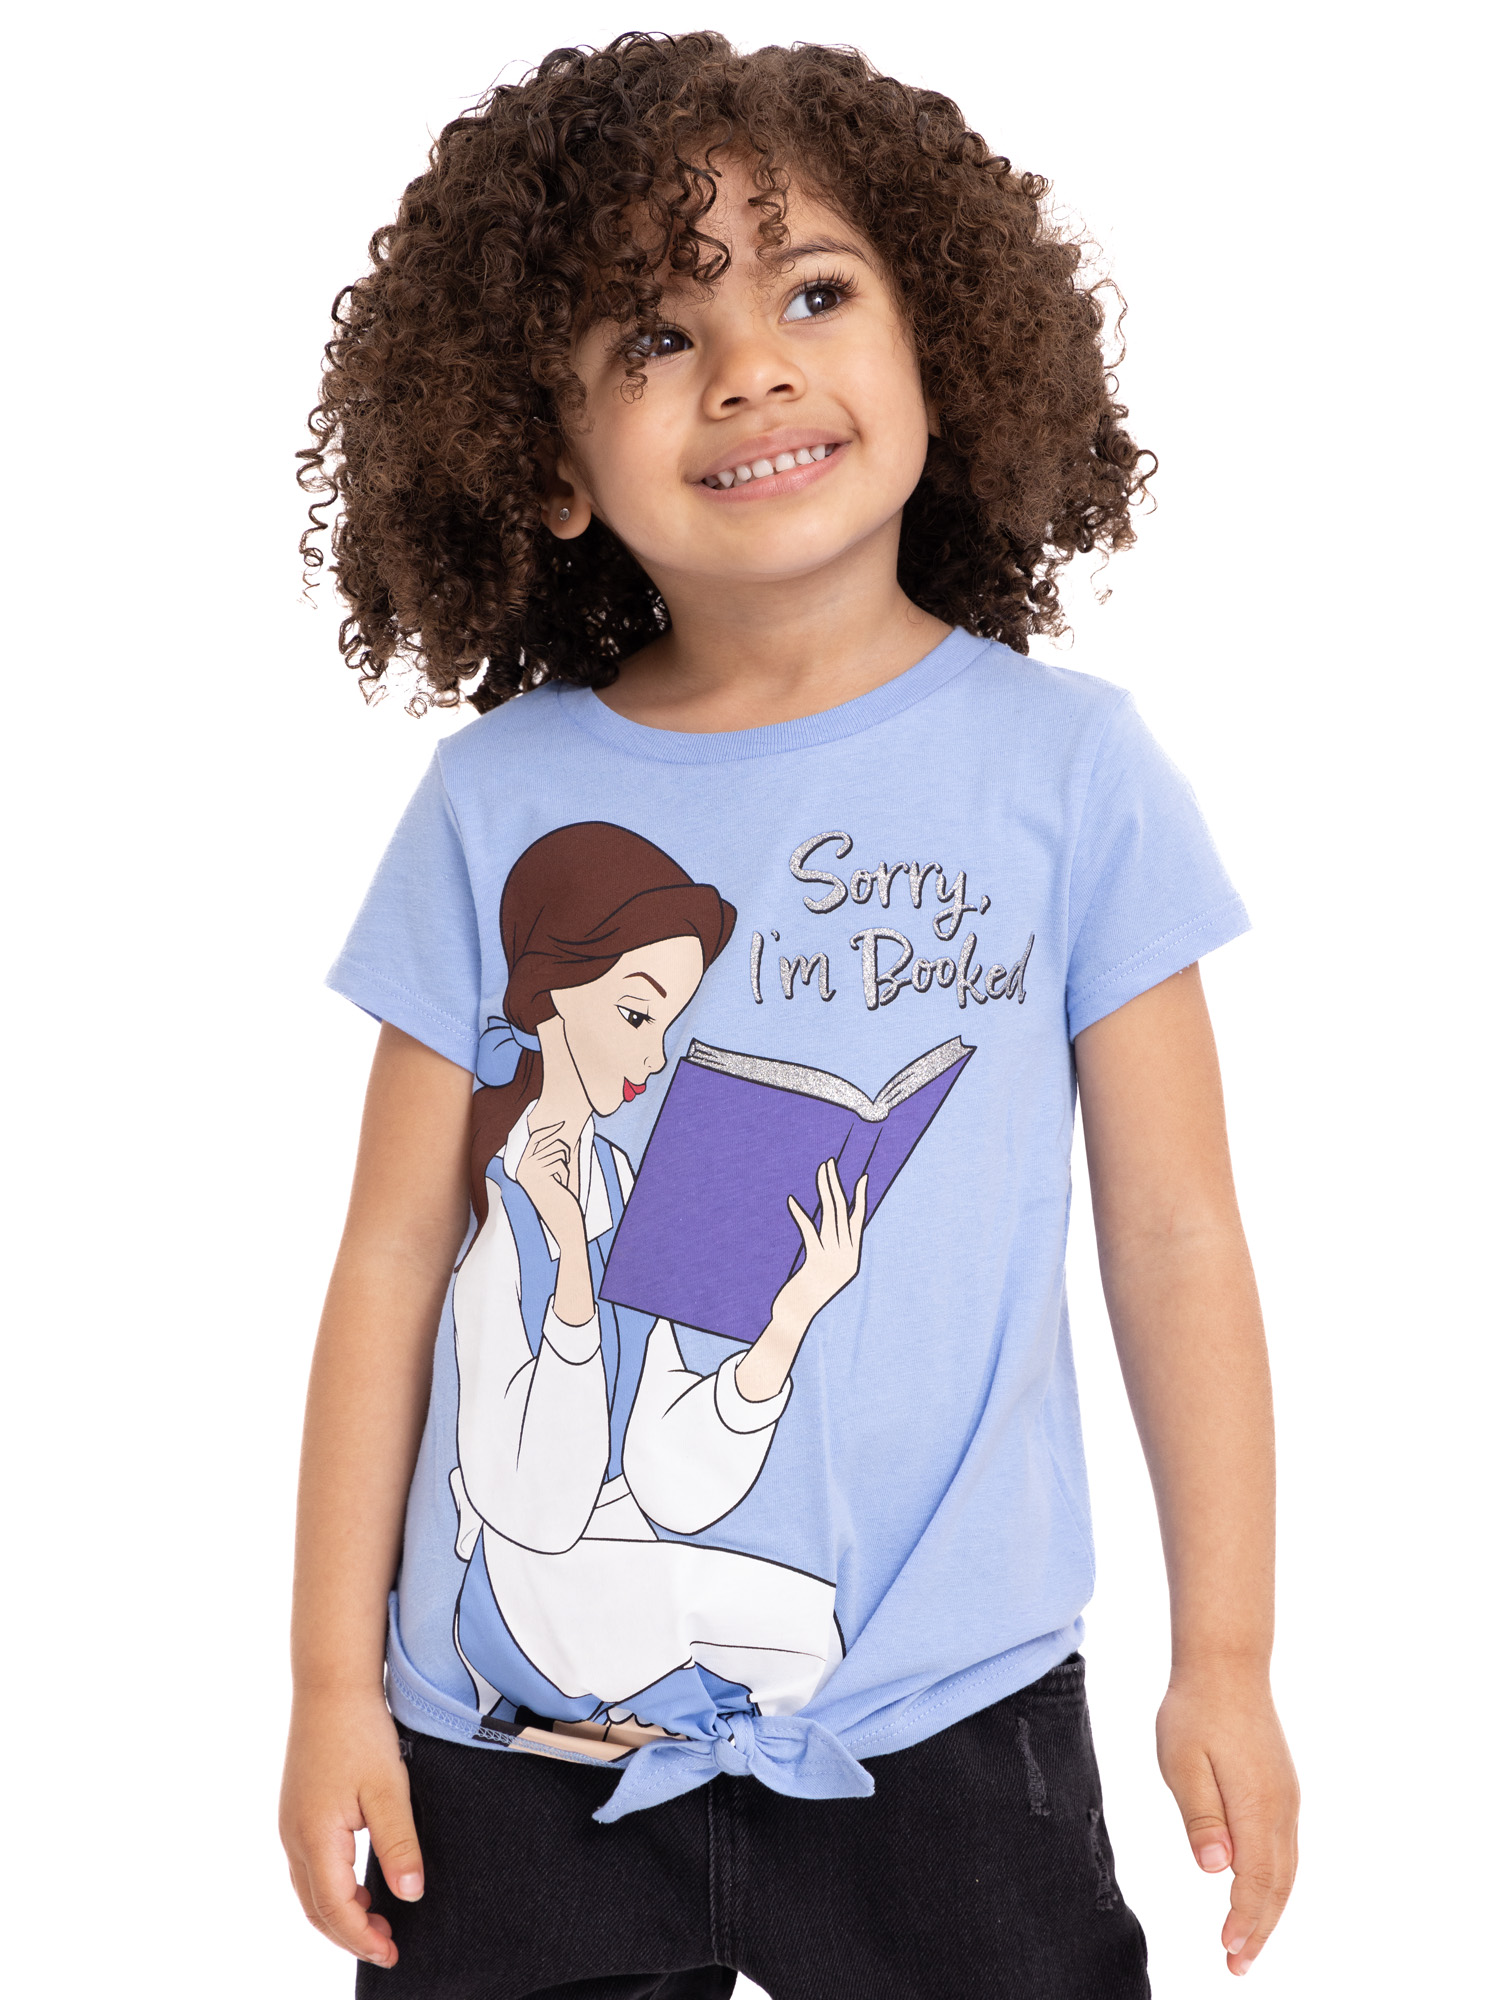 Disney Princess Toddler Girls Fashion T-Shirts with Short Sleeves, 4-Pack, Sizes 2T-5T - image 5 of 9